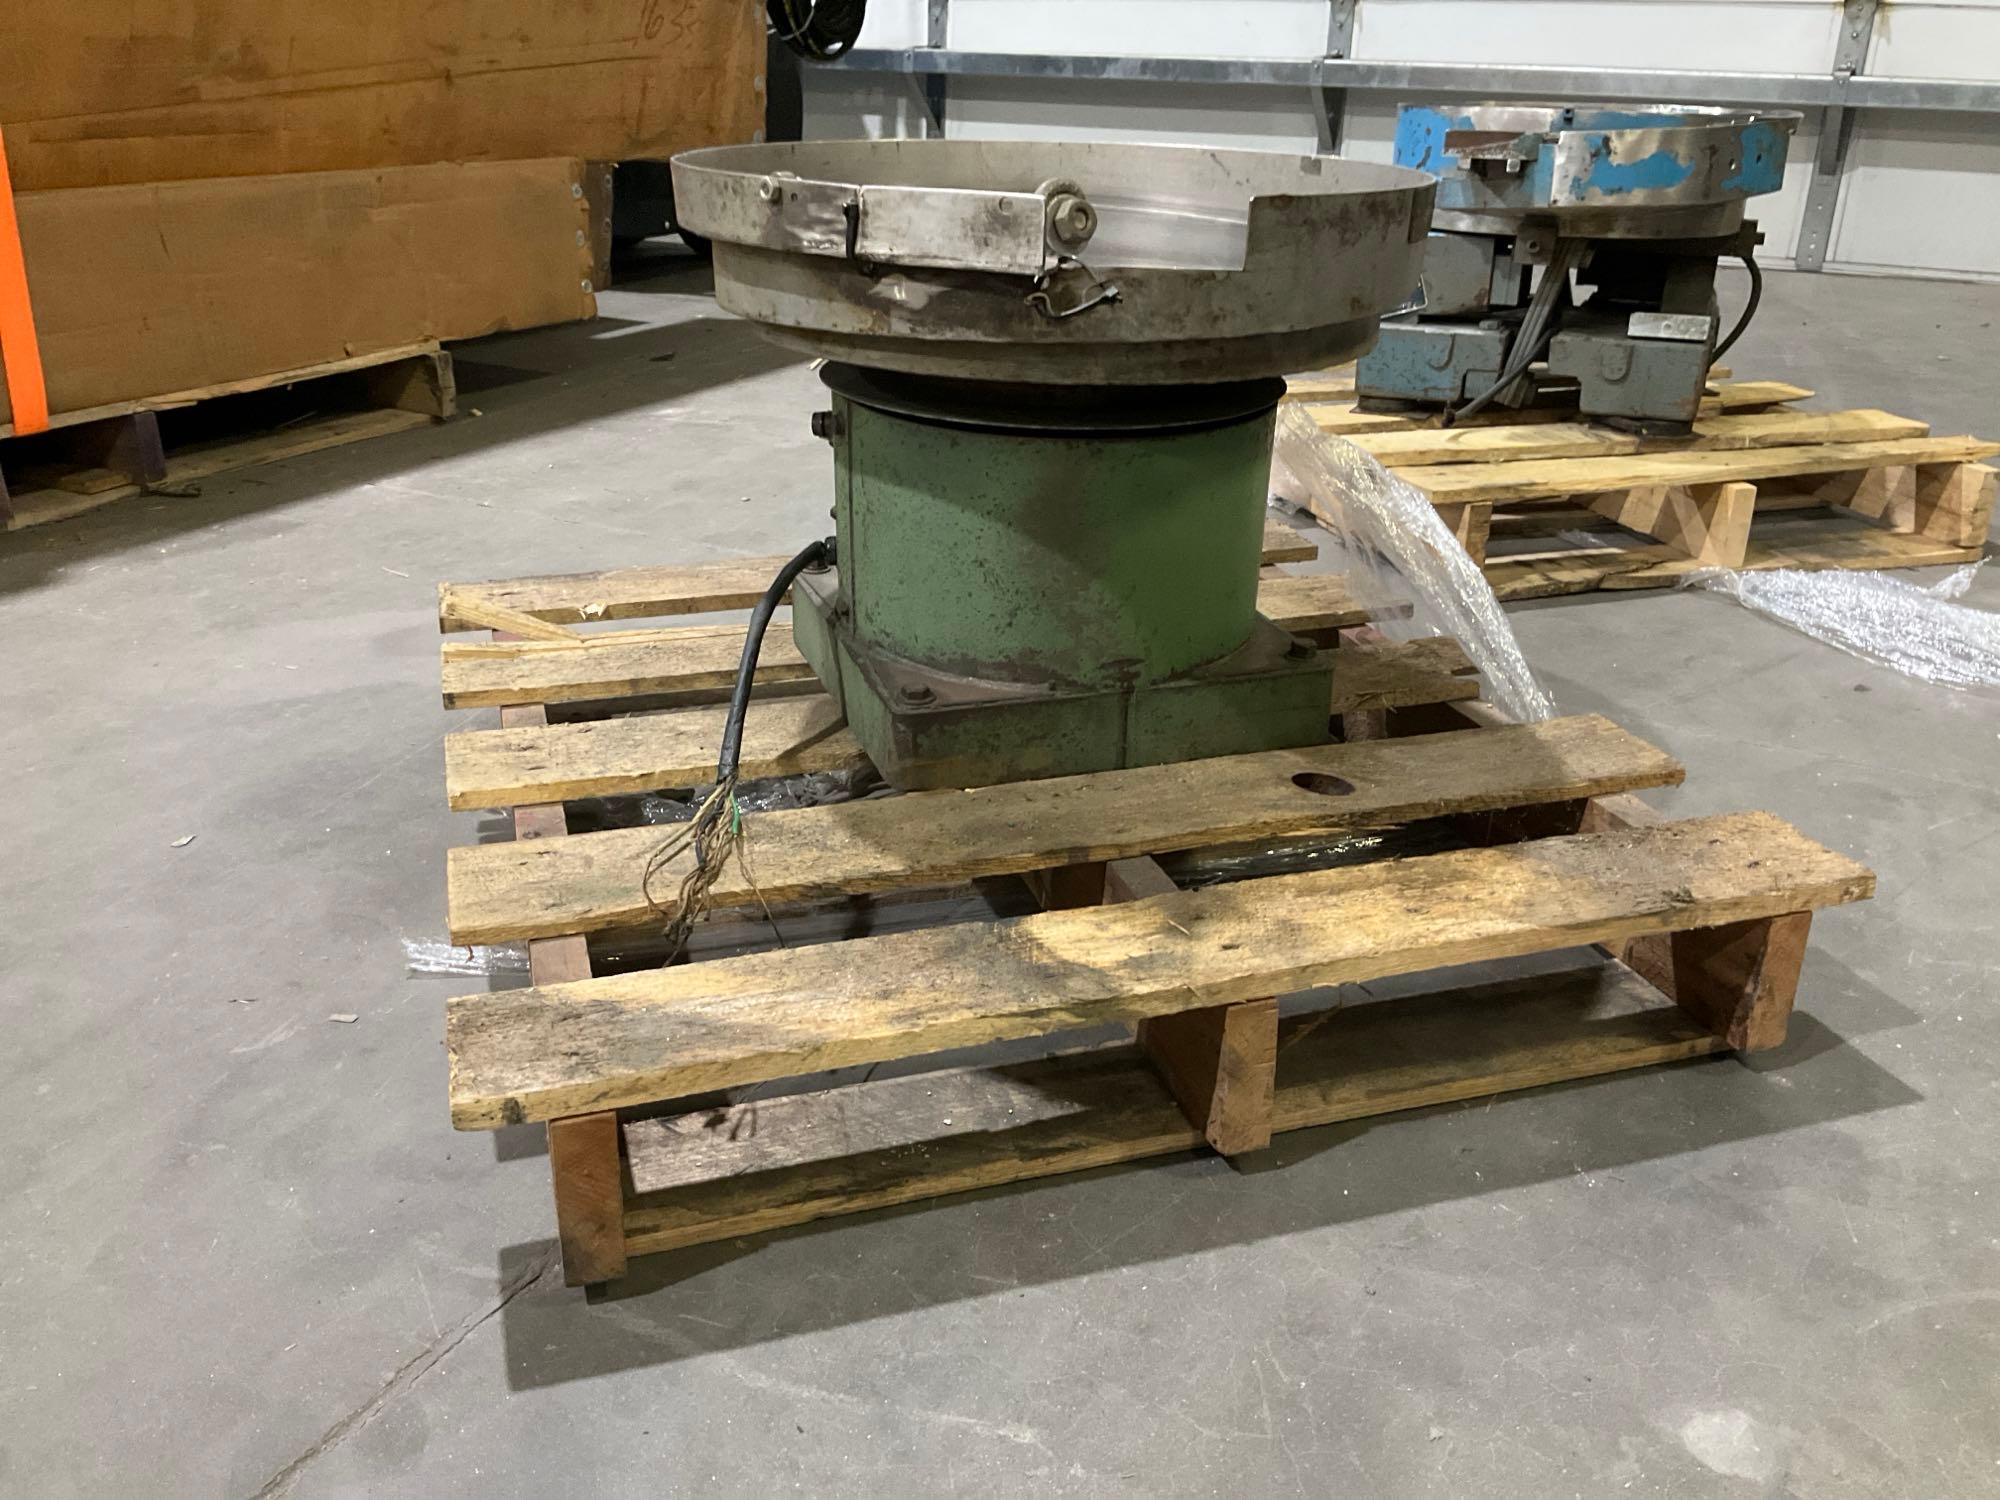 SYNTRON...VIBRATORY PARTS FEEDER TYPE EB01C, 115V, CYCLES 60, CONDITION UNKNOWN...